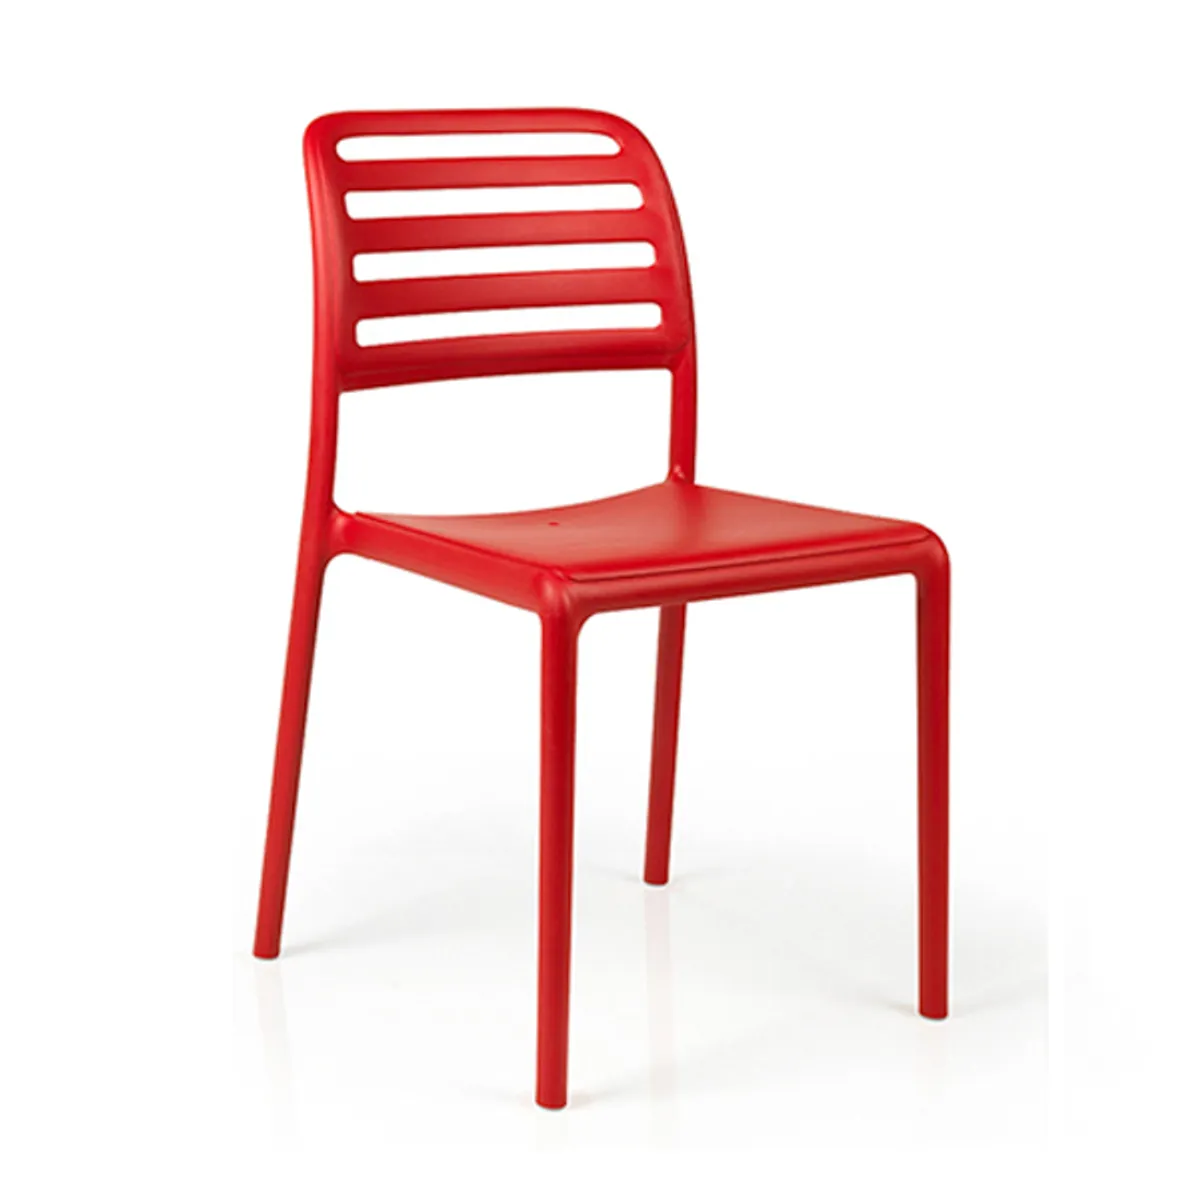 Costa bistrot side chair 2